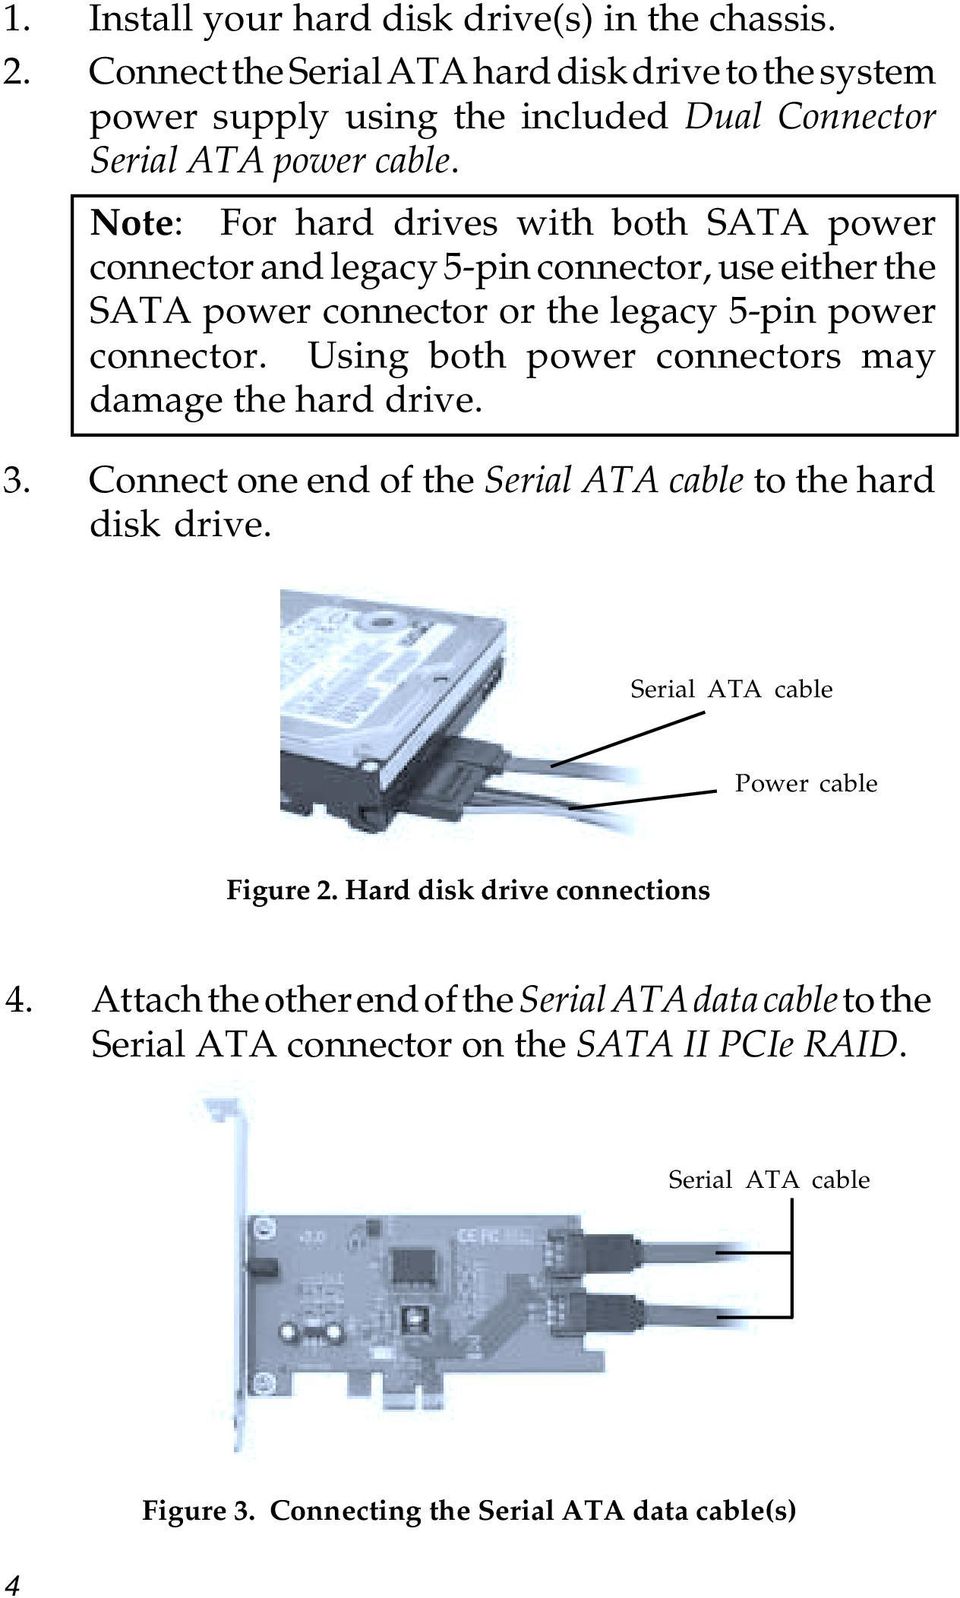 Note: For hard drives with both SATA power connector and legacy 5-pin connector, use either the SATA power connector or the legacy 5-pin power connector.